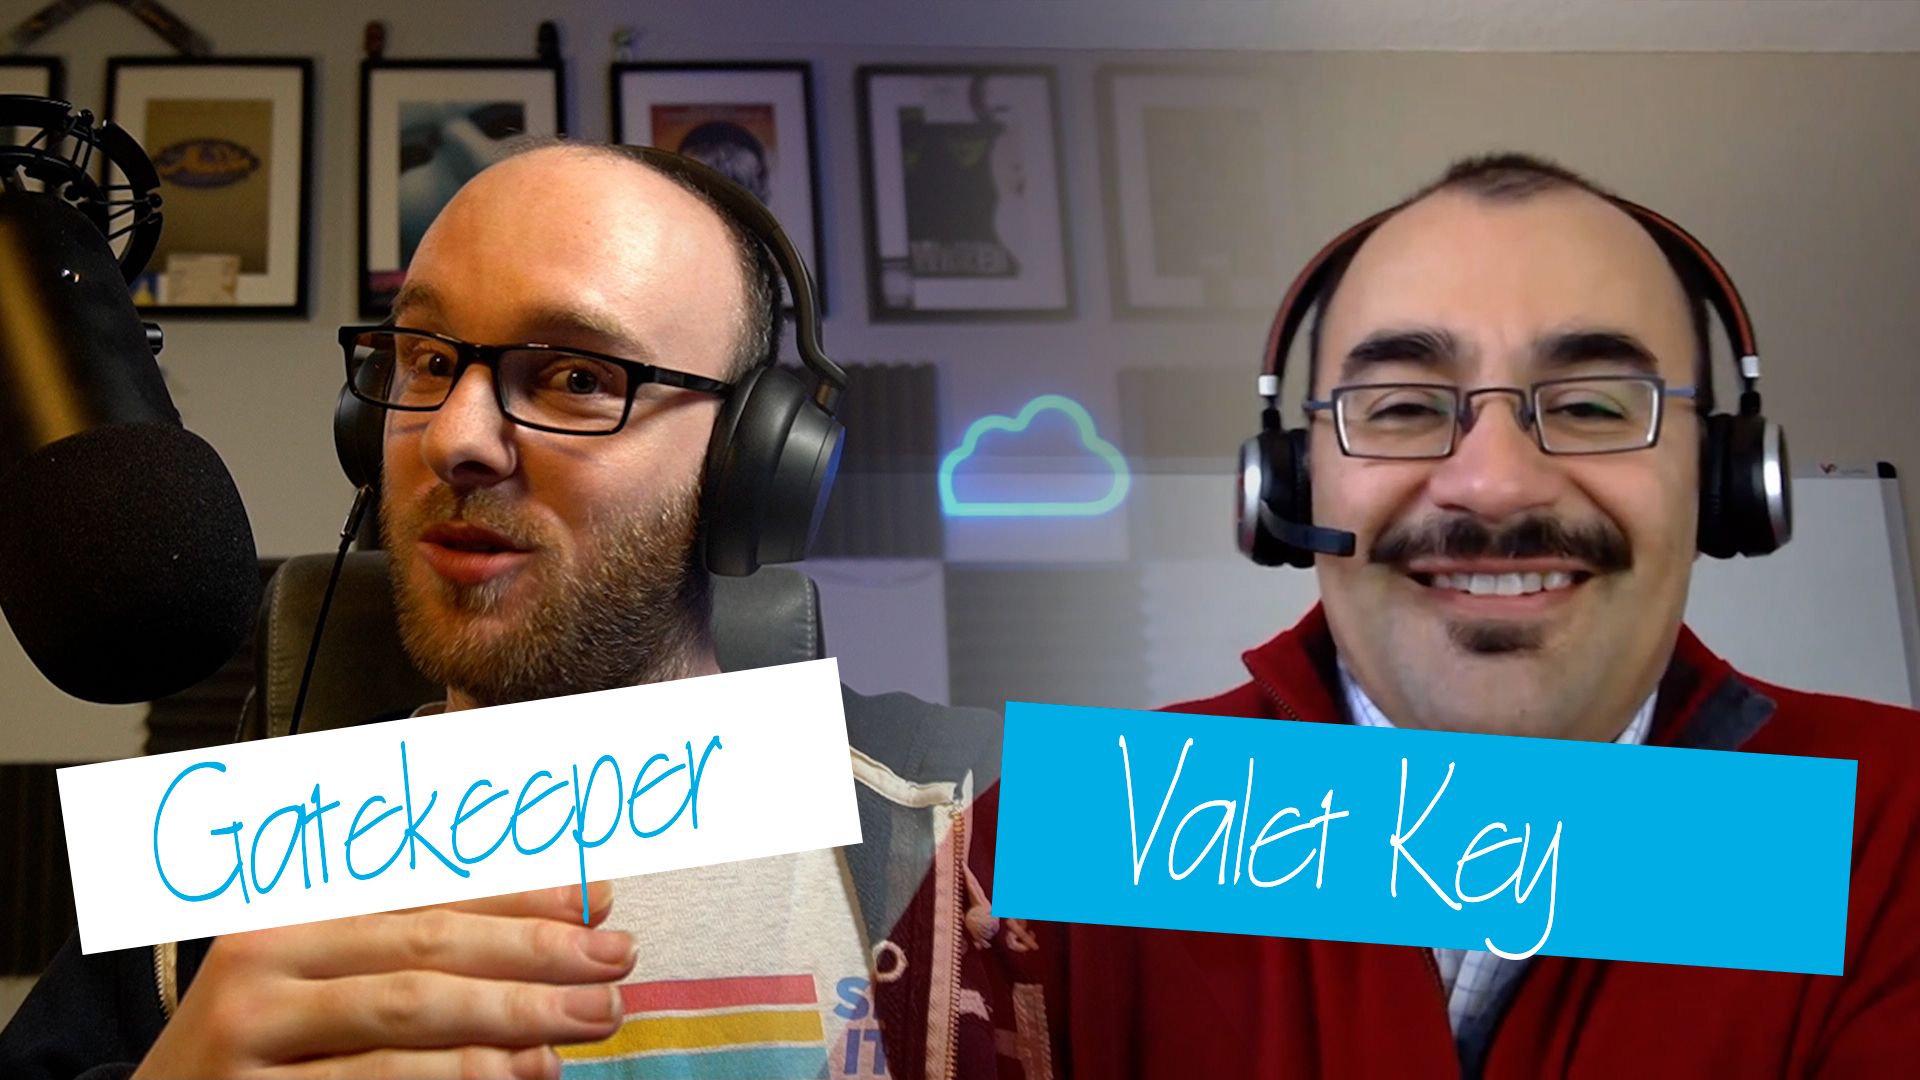 23 - Gatekeeper and Valet Key Patterns - Secure your APIs and Resources